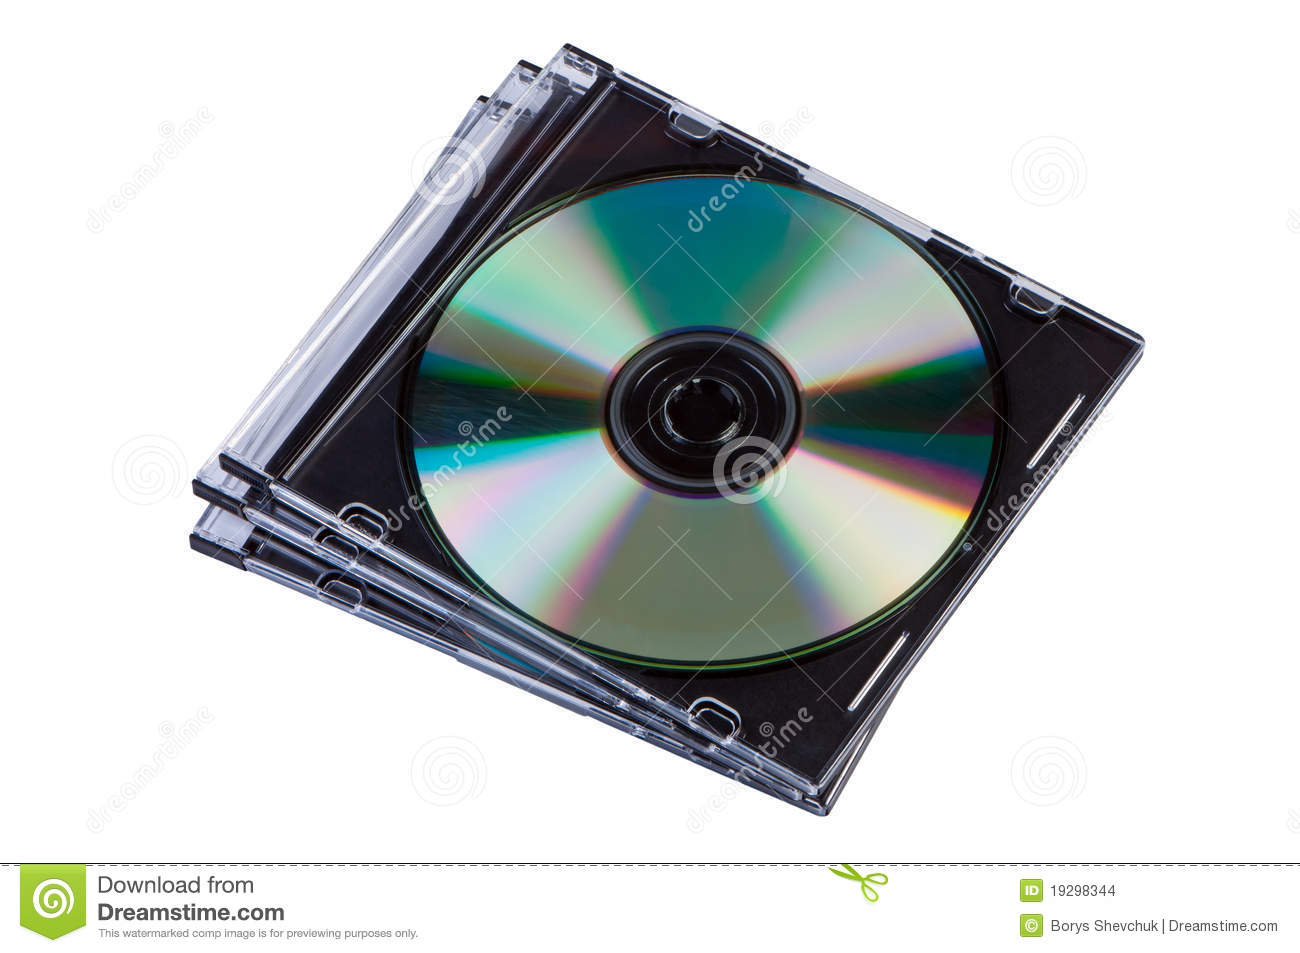 Stack Of Cd Discs In Box Isolated  Stock Images   Image  19298344